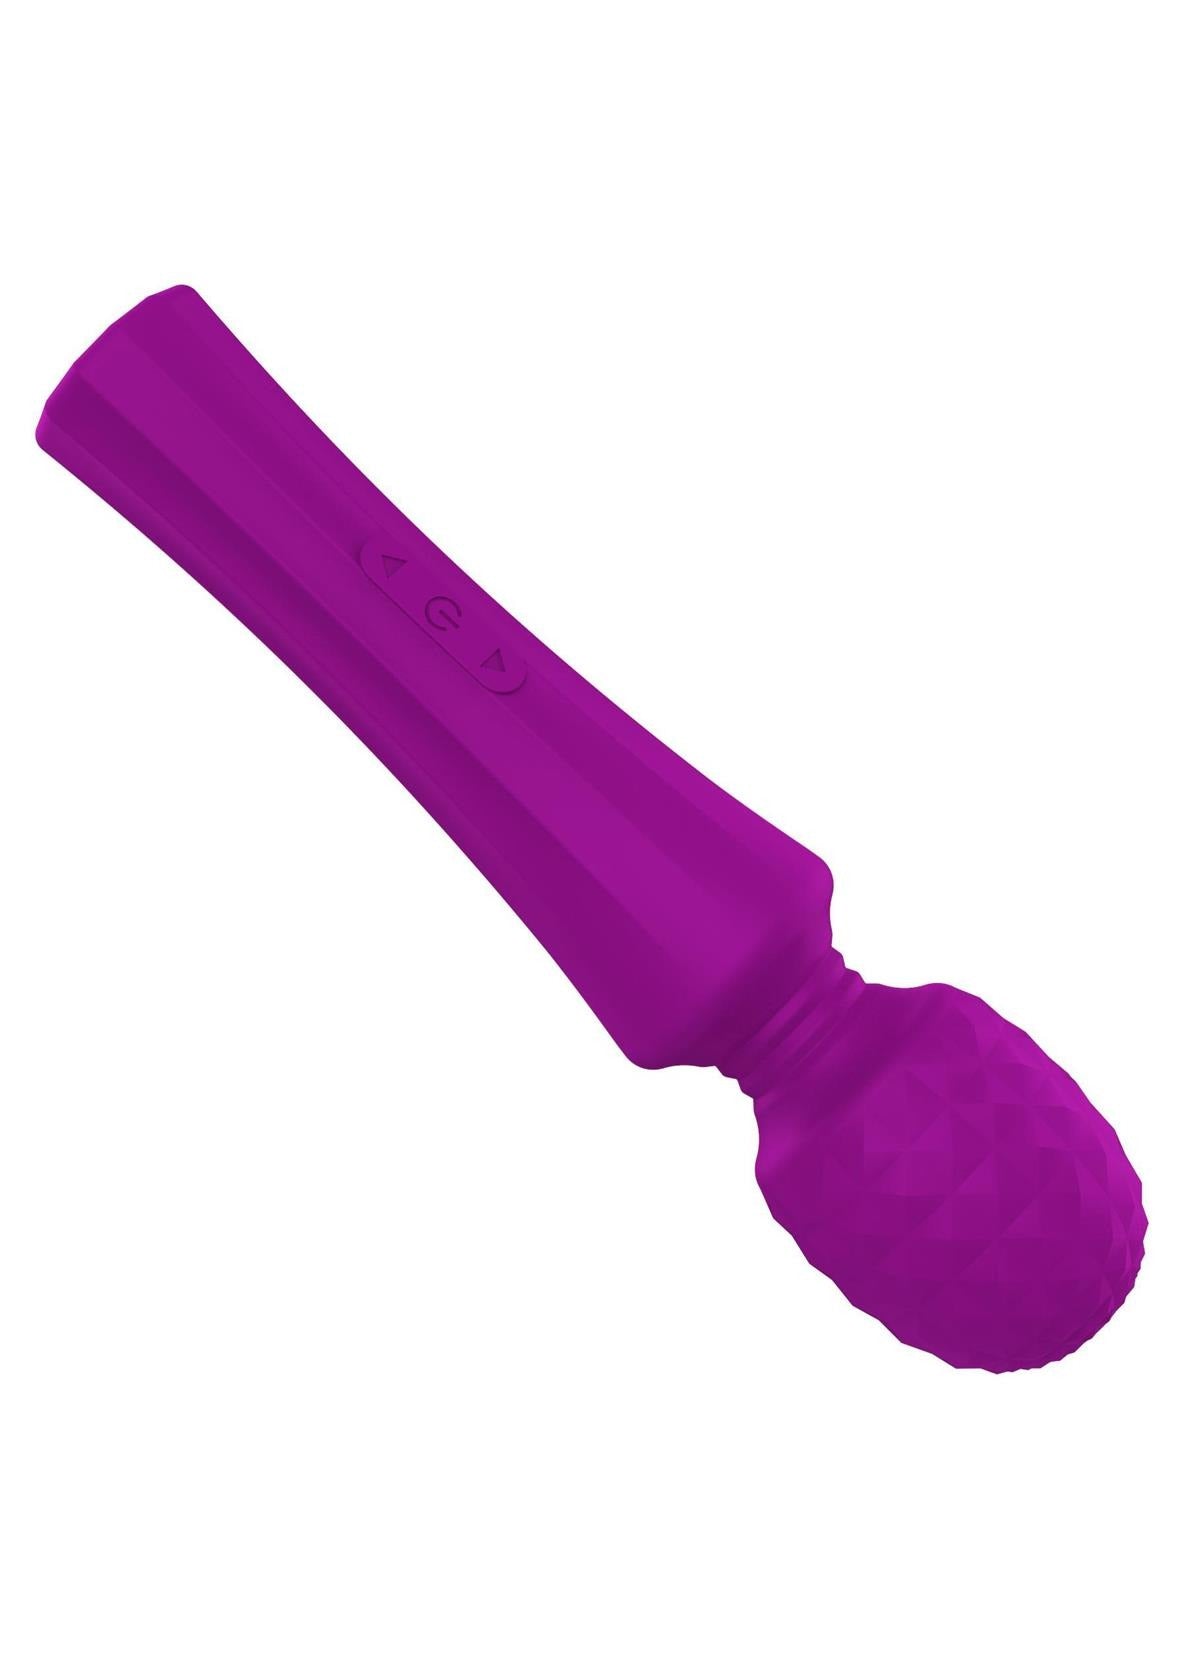 Bossoftoys - 22-00030 - Power wand Massager - Rechargeable - Silicone - 10 Function - Purple - Colour Box